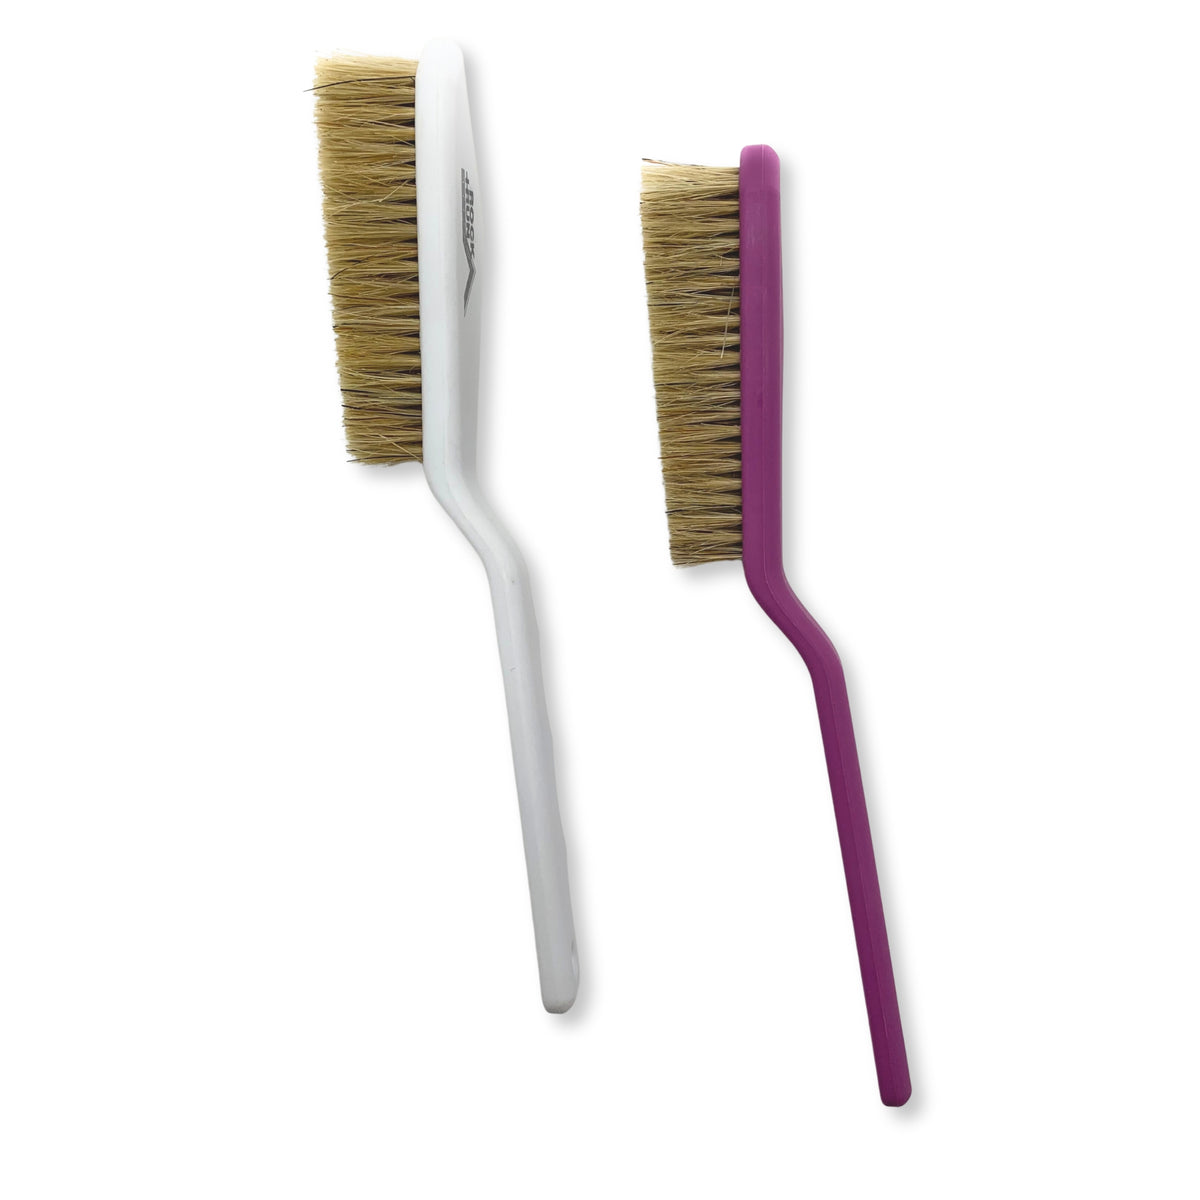 Rock + Run Shaped Boars Hair Brush in white and purple